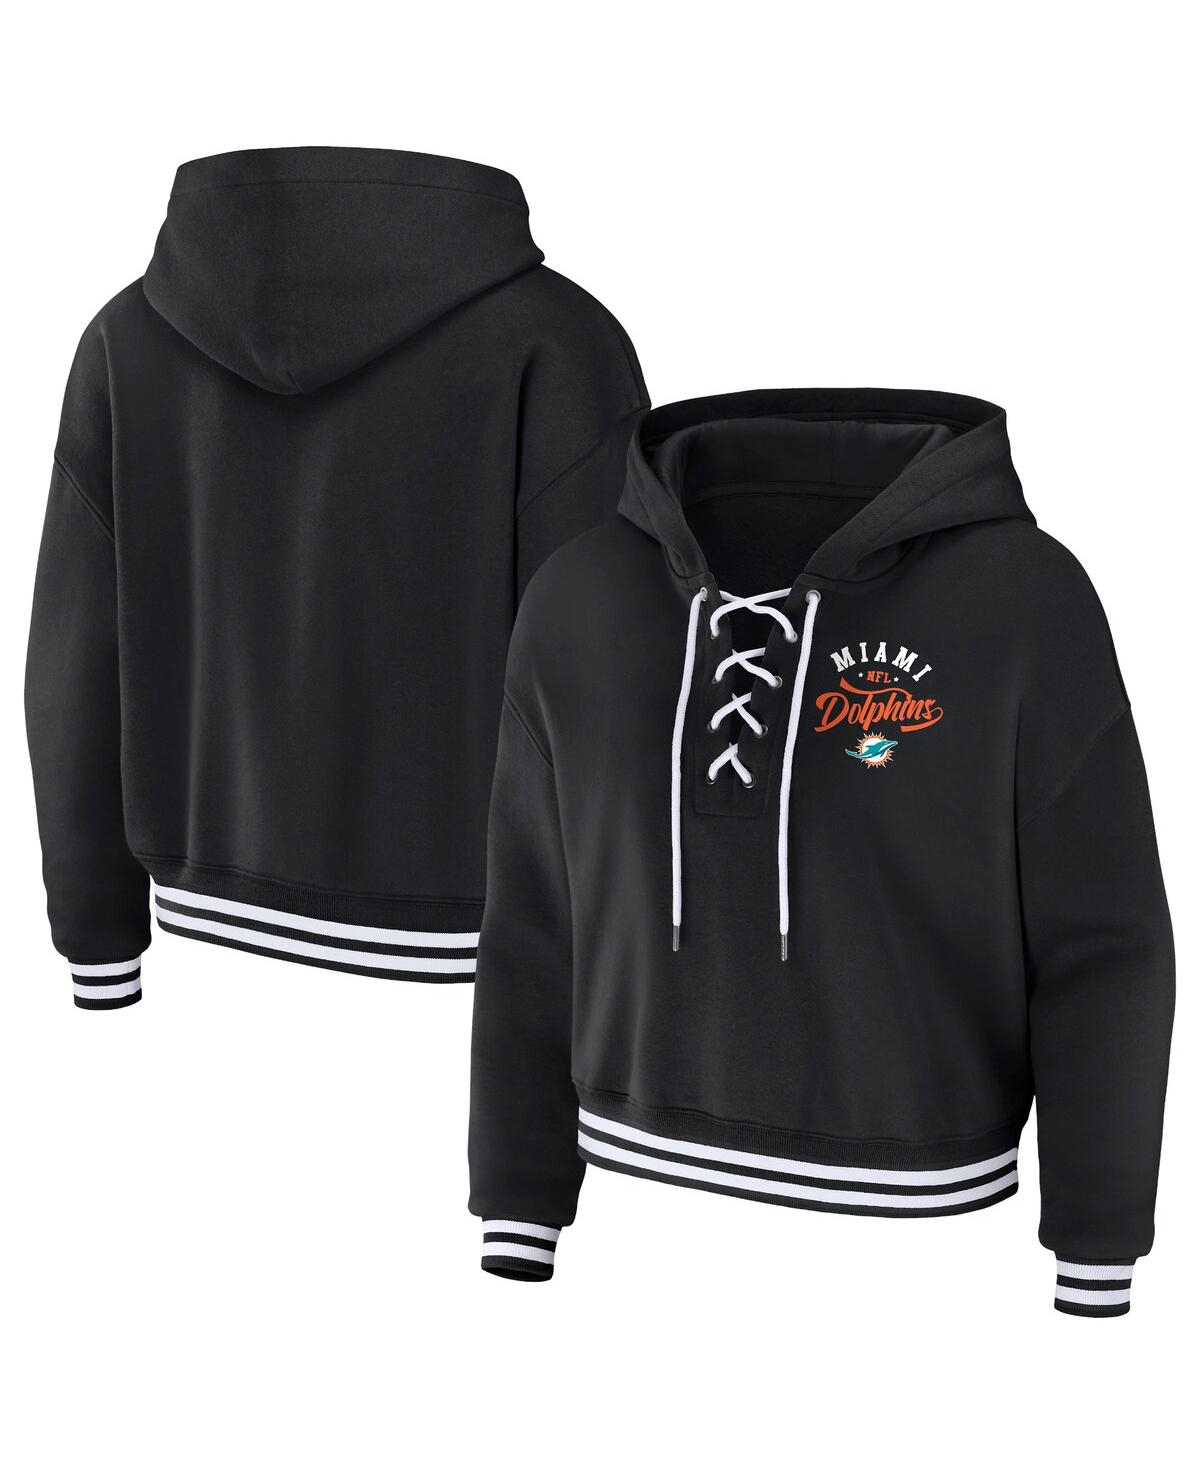 Women's Wear by Erin Andrews Black Miami Dolphins Lace-Up Pullover Hoodie - Black